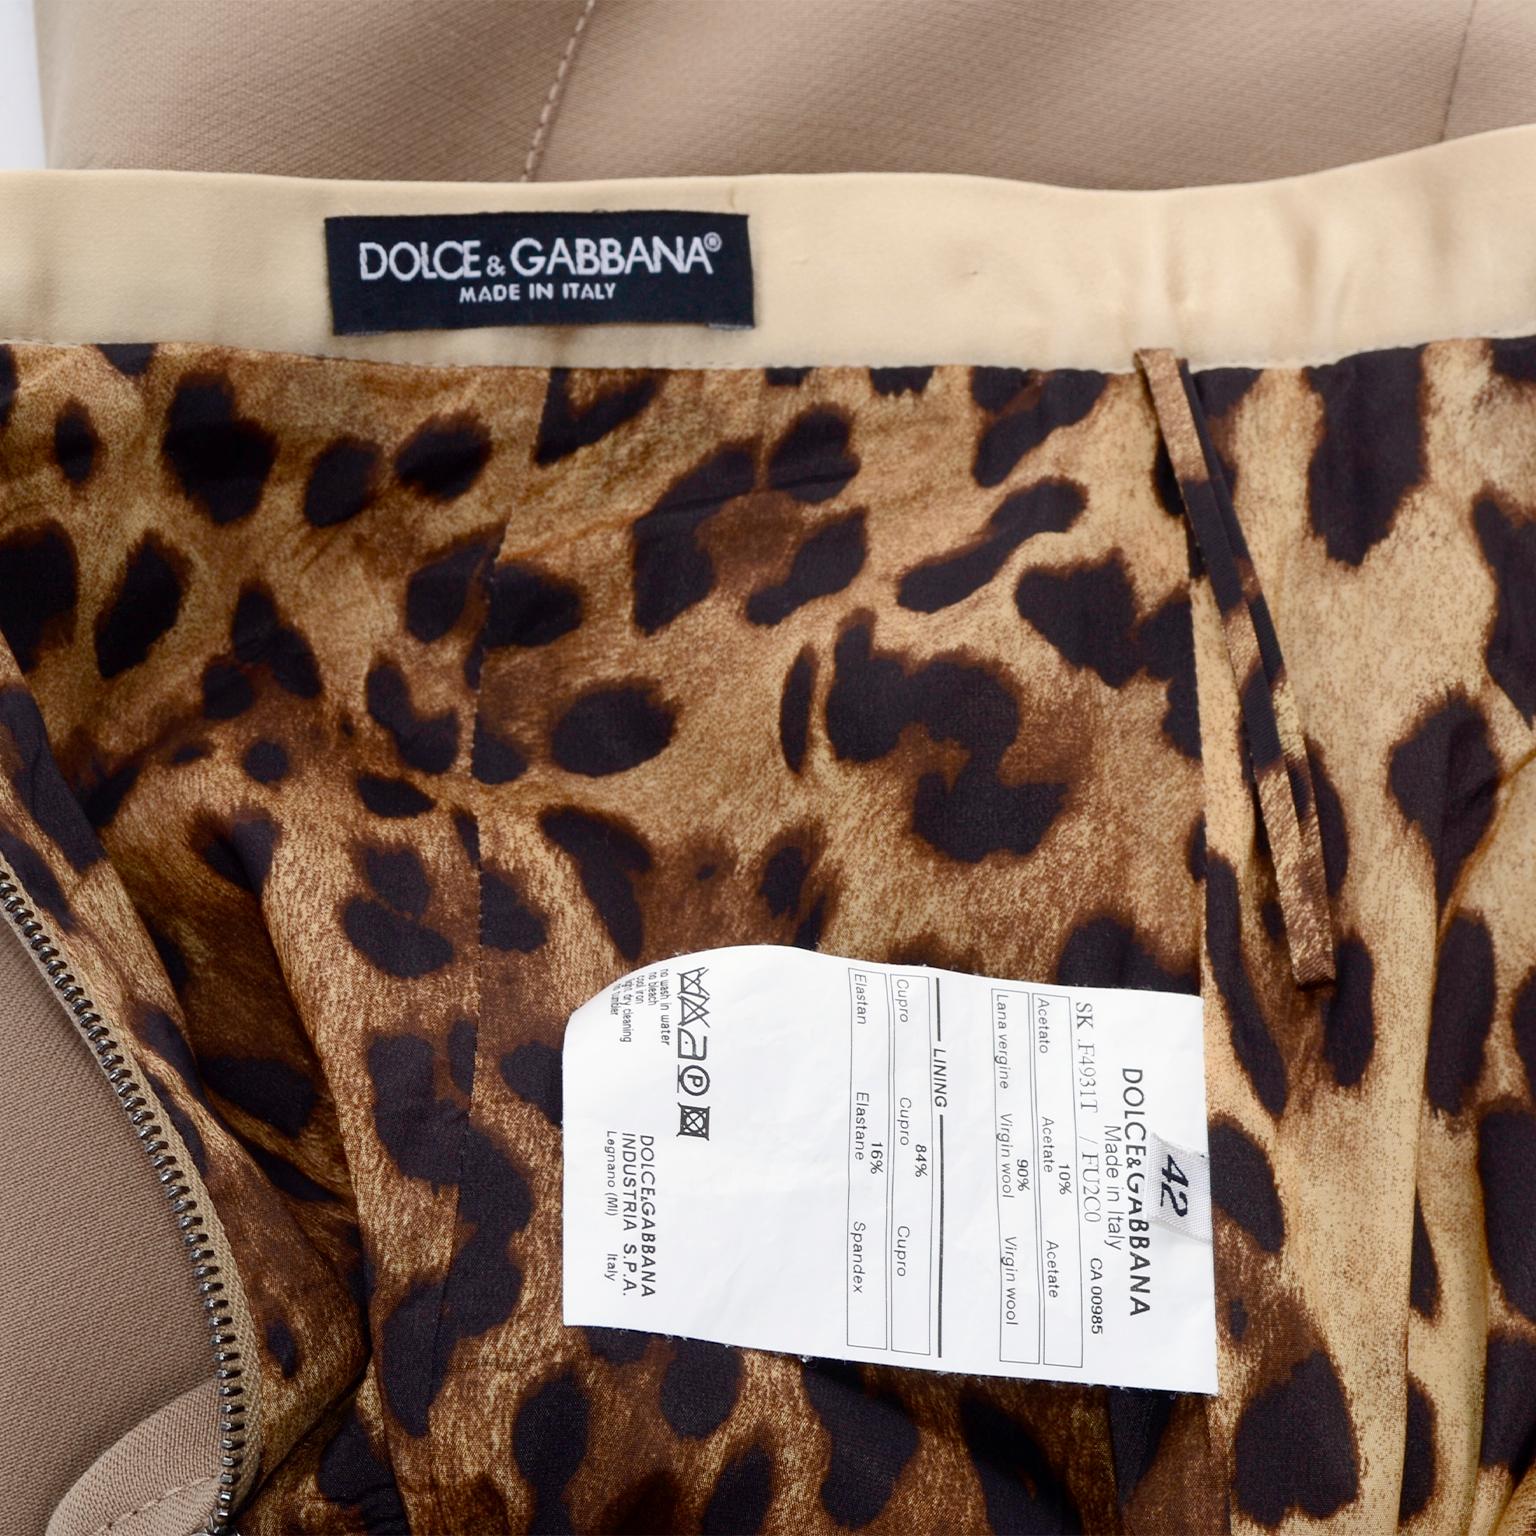 Brown Dolce & Gabbana Pencil Skirt With Satin Trim and Cheetah Print Lining For Sale